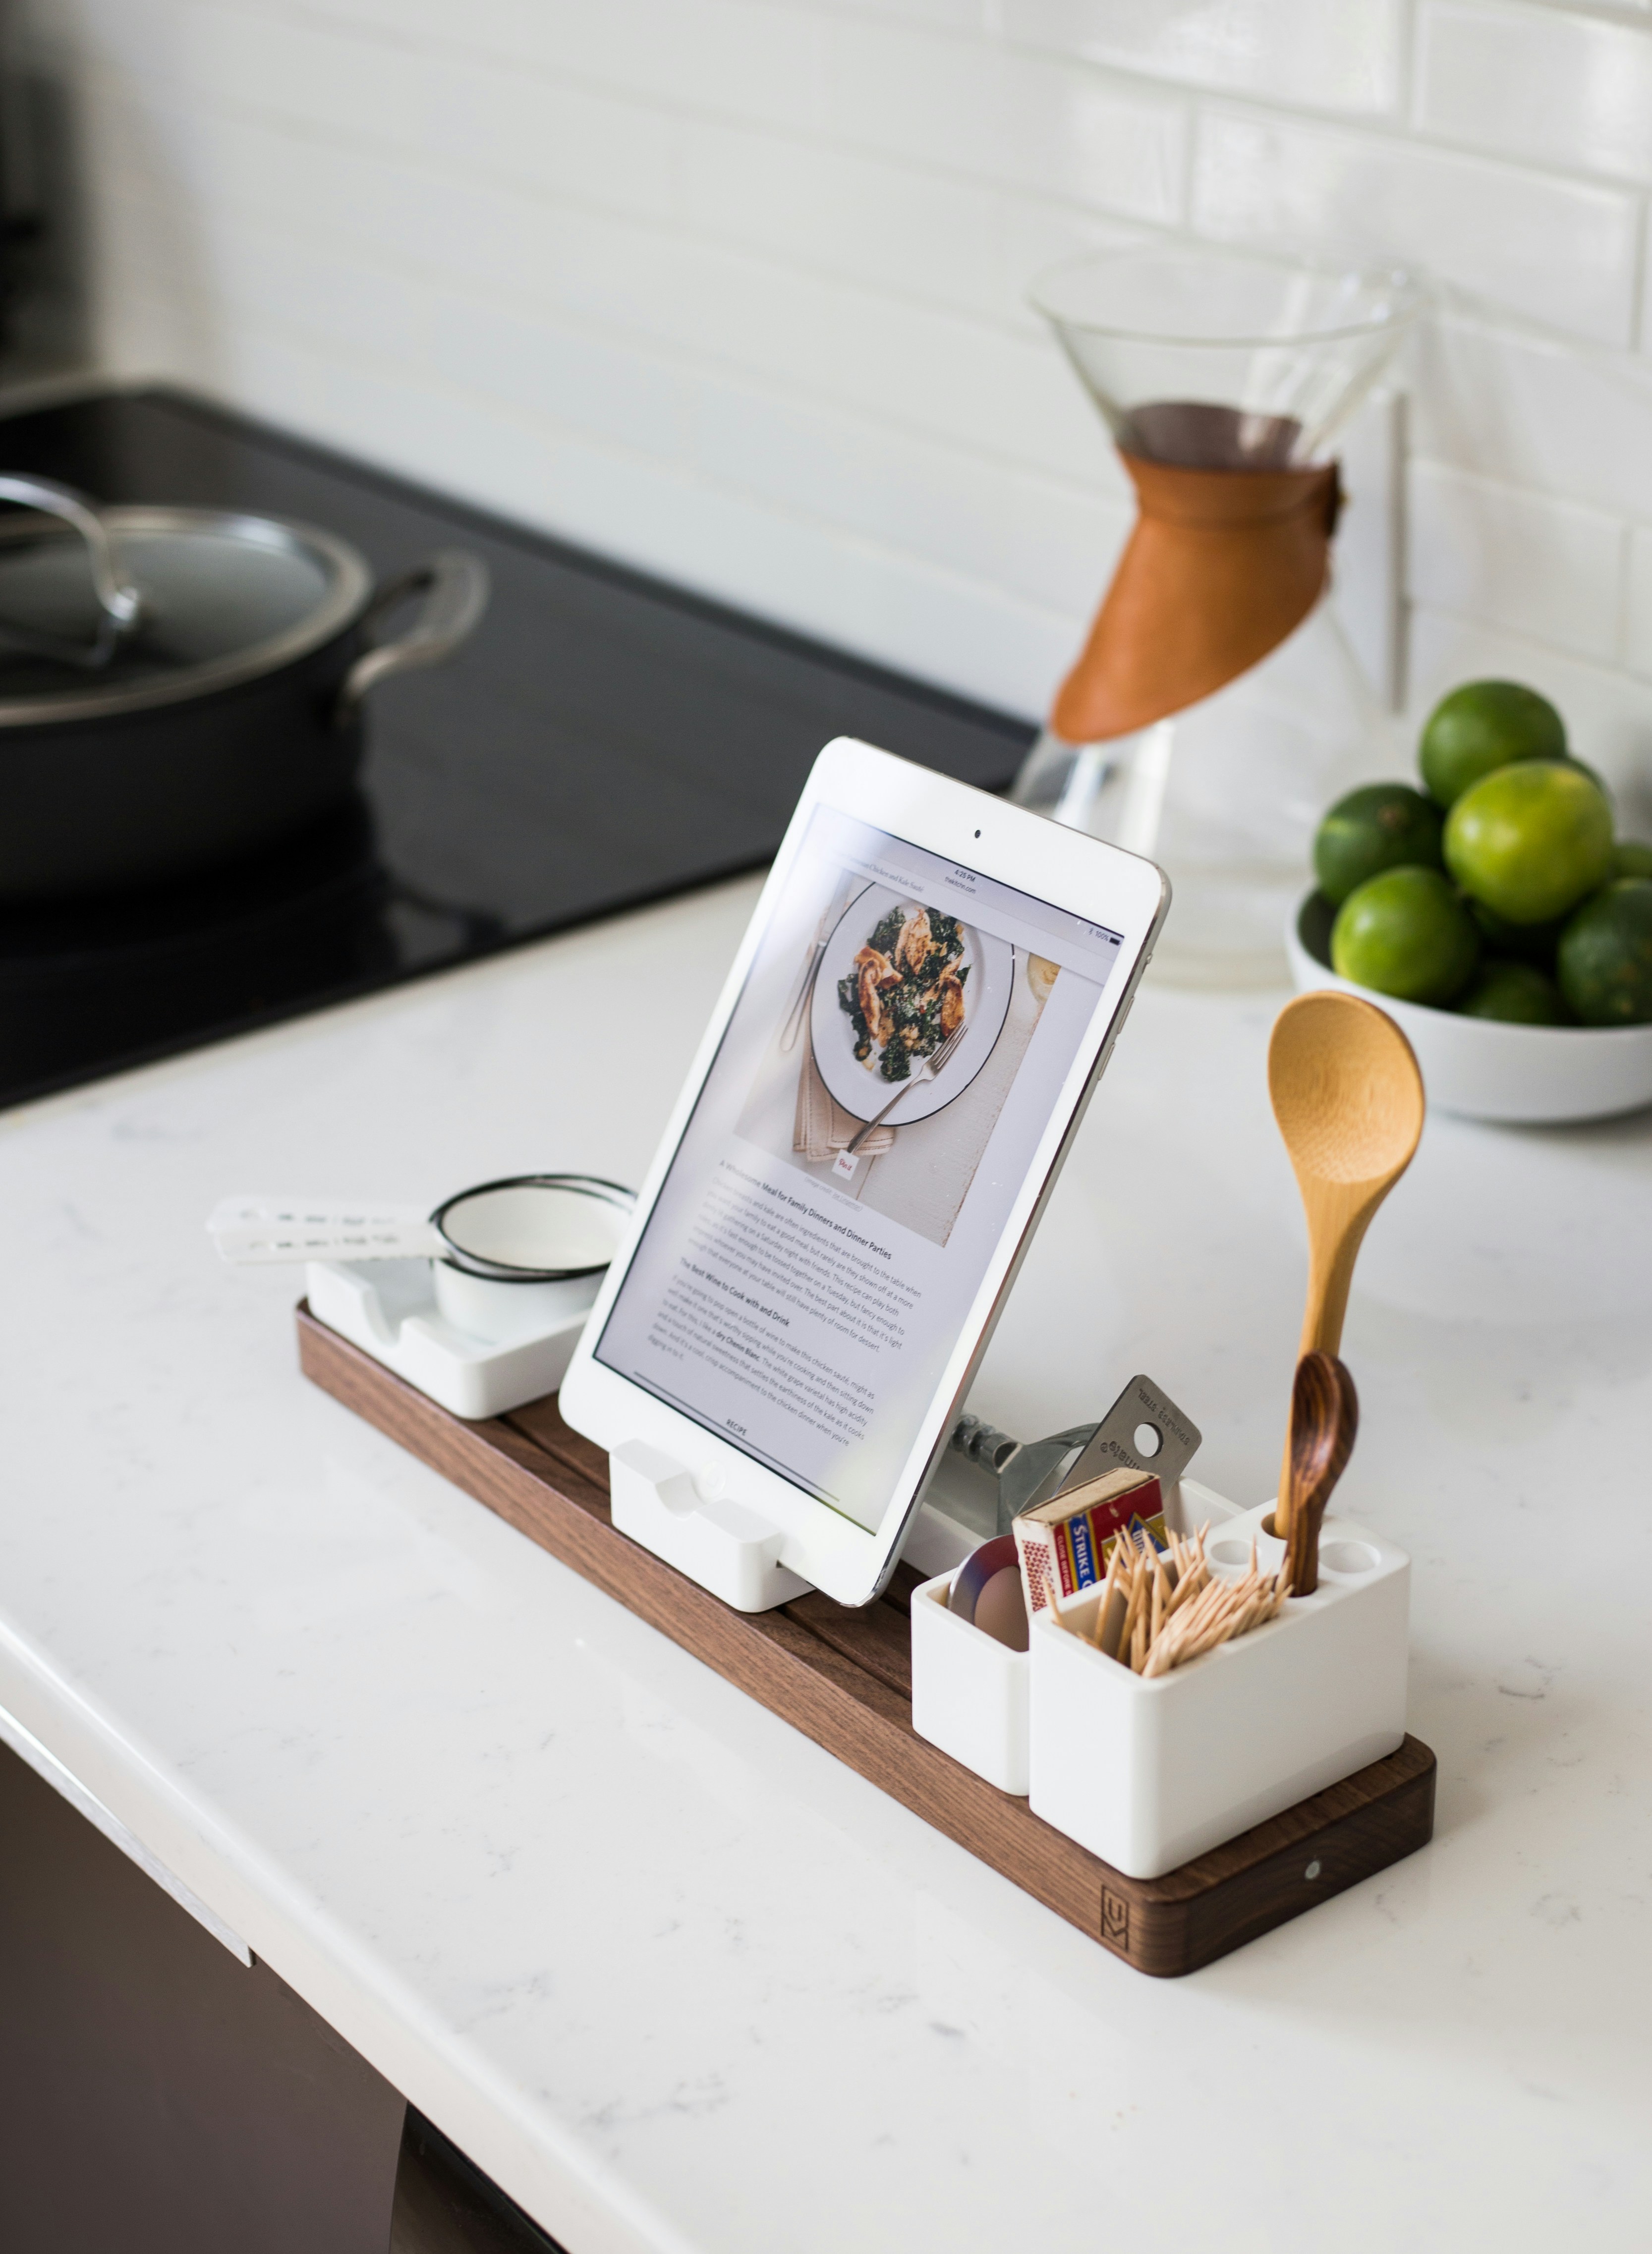 The Ultimate Cooking Companion: Smart Kitchen Scale